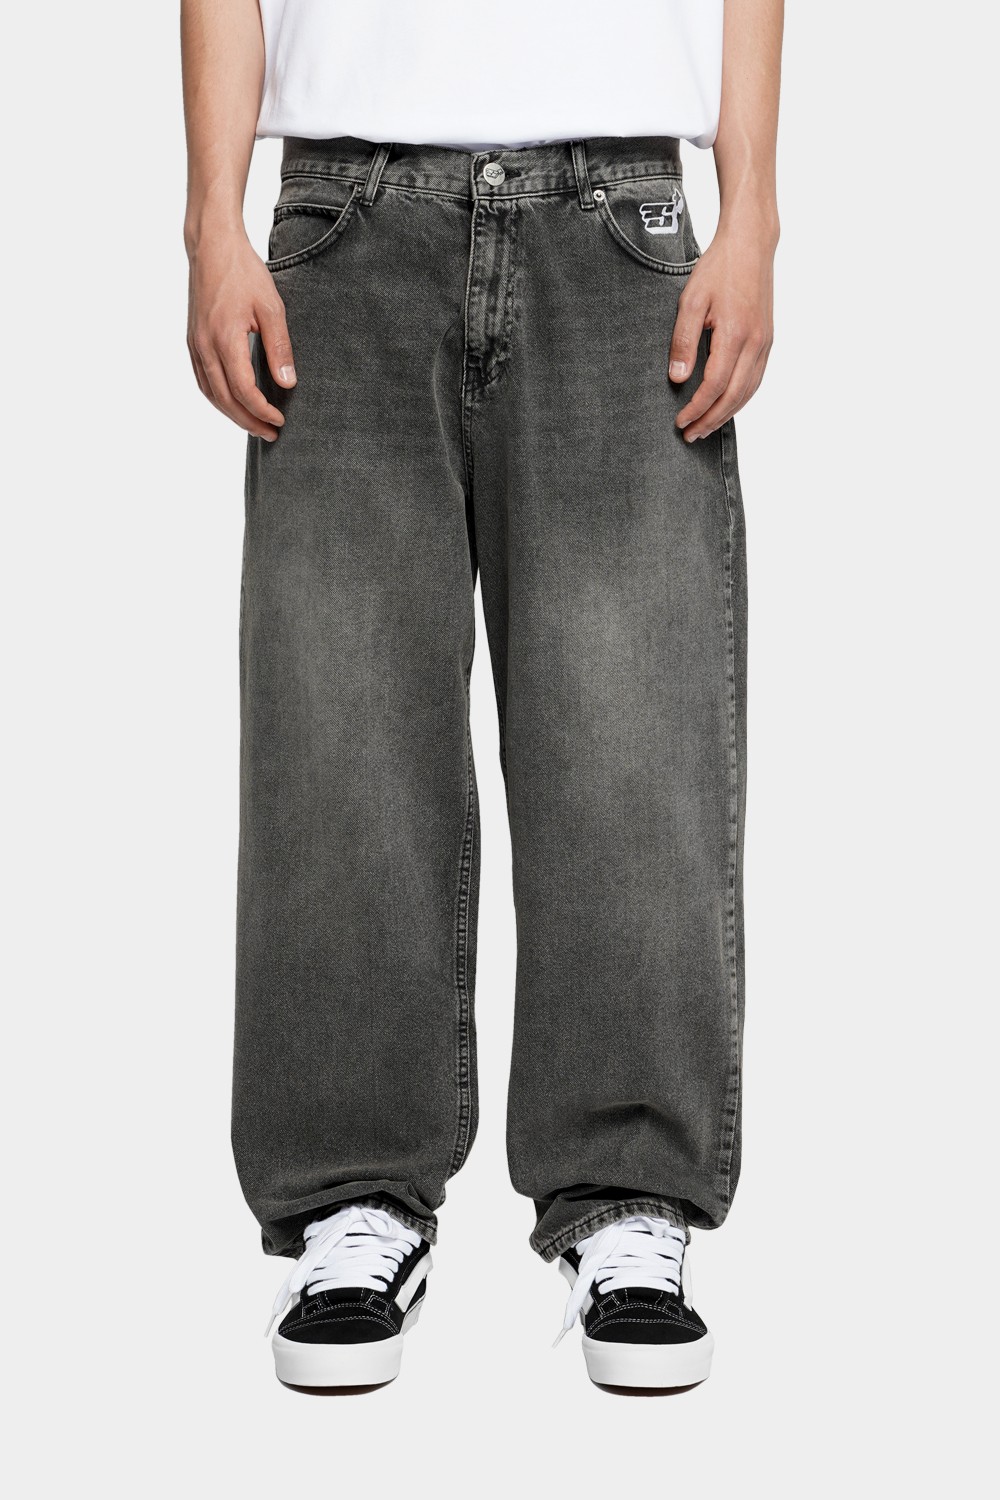 Baggy Skate Jeans - Stone Grey (SHBS-7)